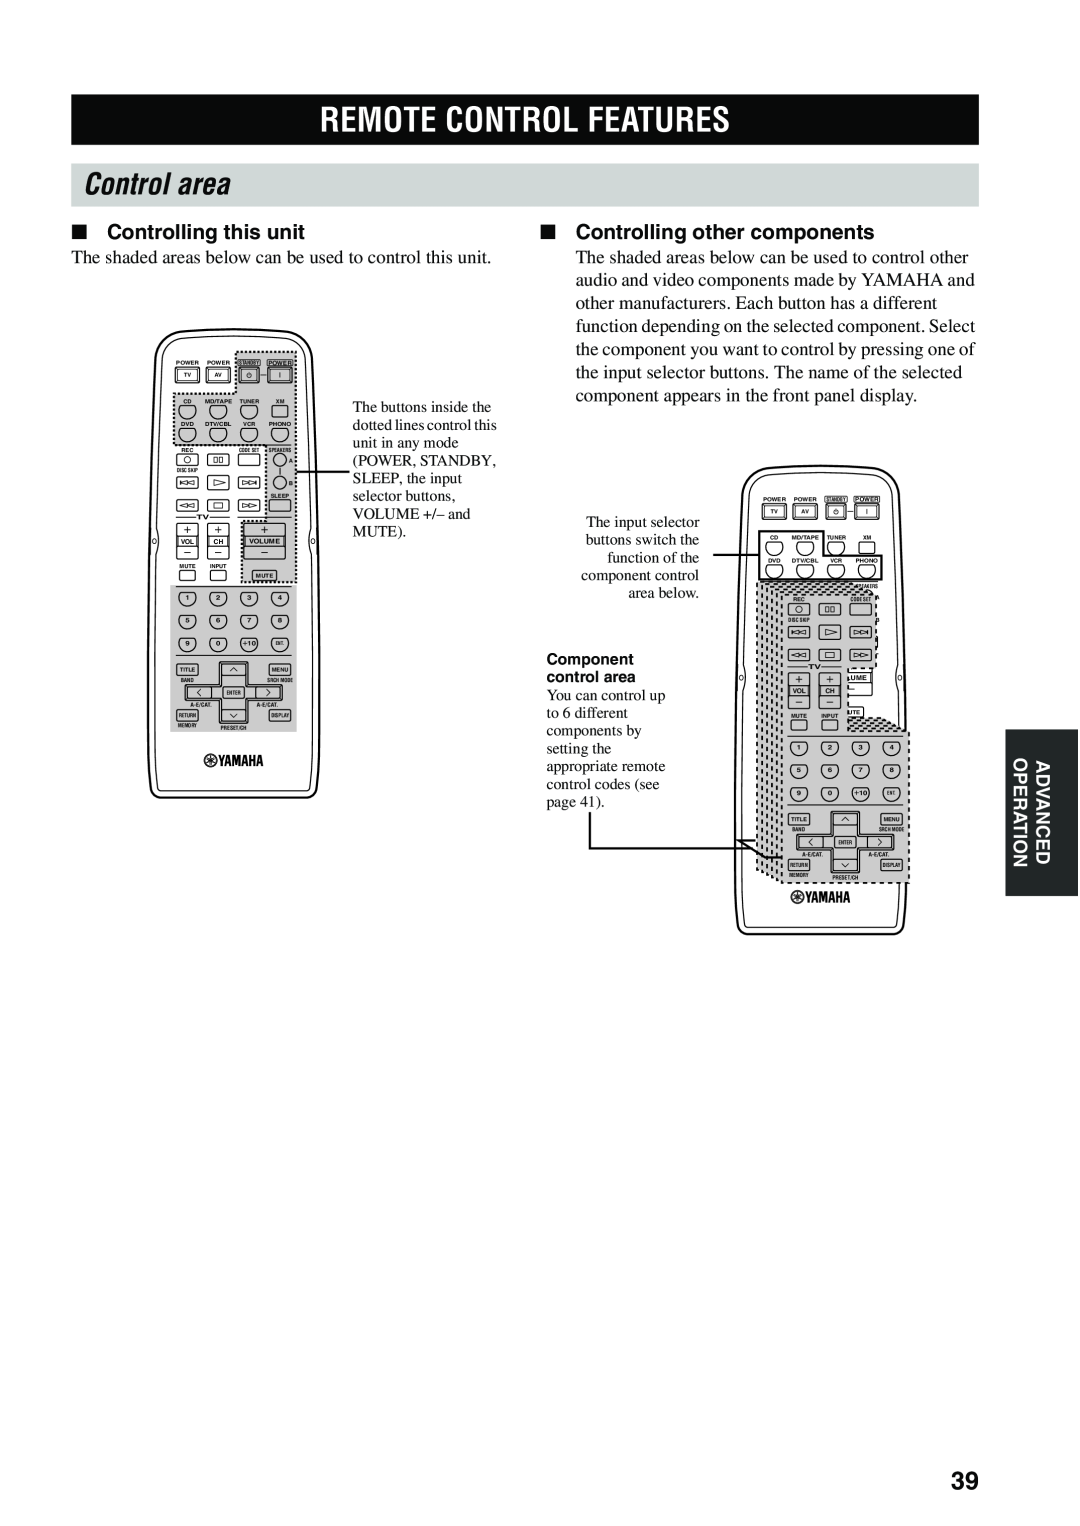 Yamaha RX-497 owner manual Remote Control Features, Control area, Controlling this unit, Controlling other components 